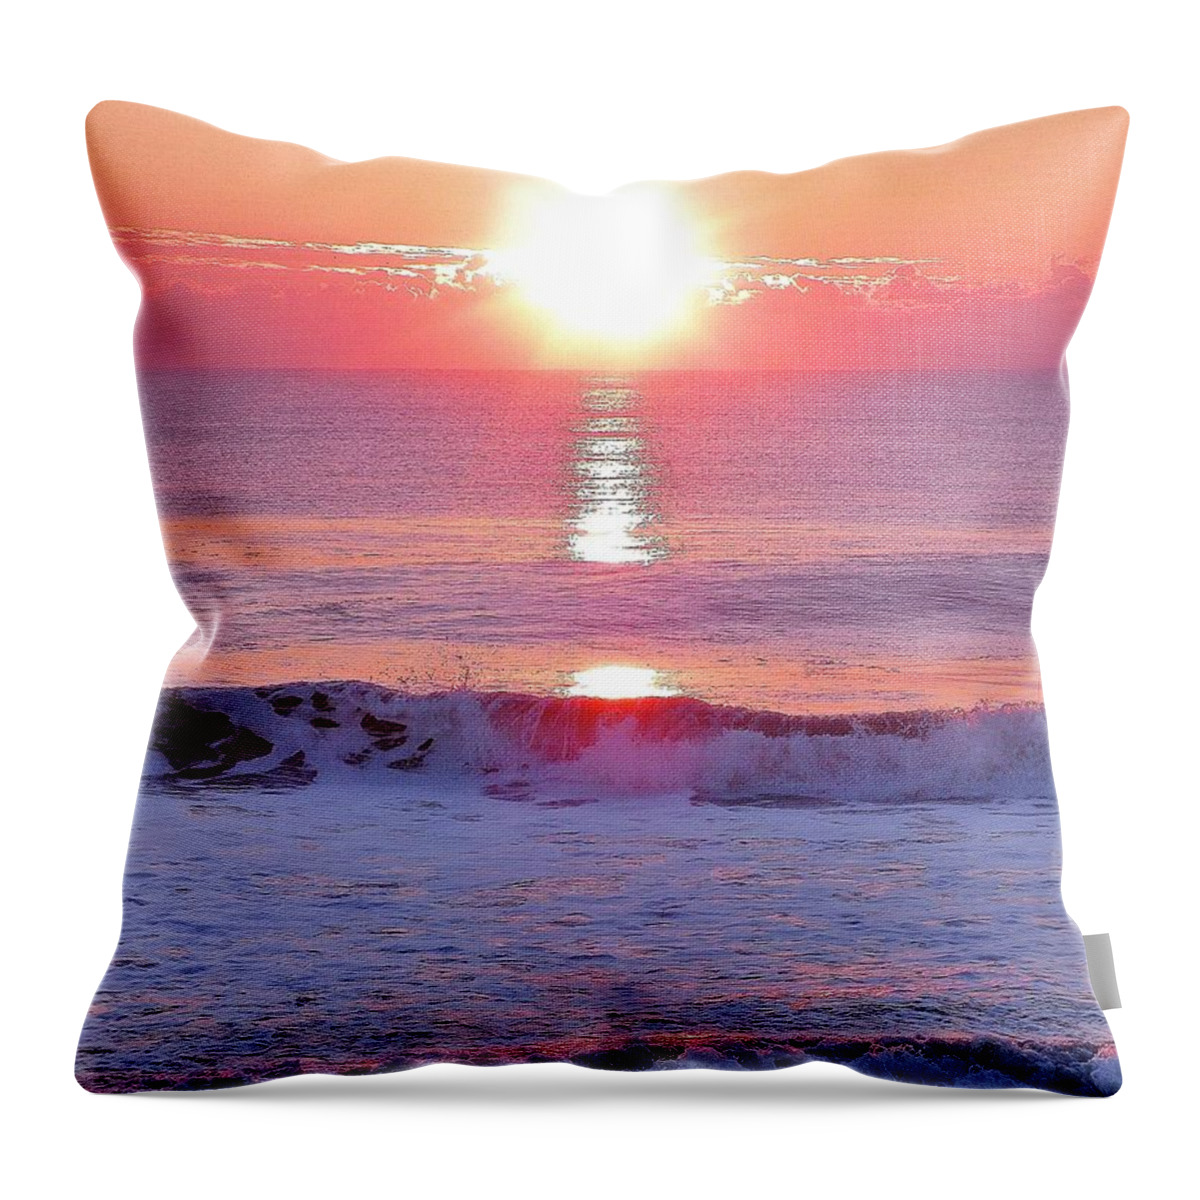 Landscapes Throw Pillow featuring the photograph Morning Has Broken by Kim Bemis